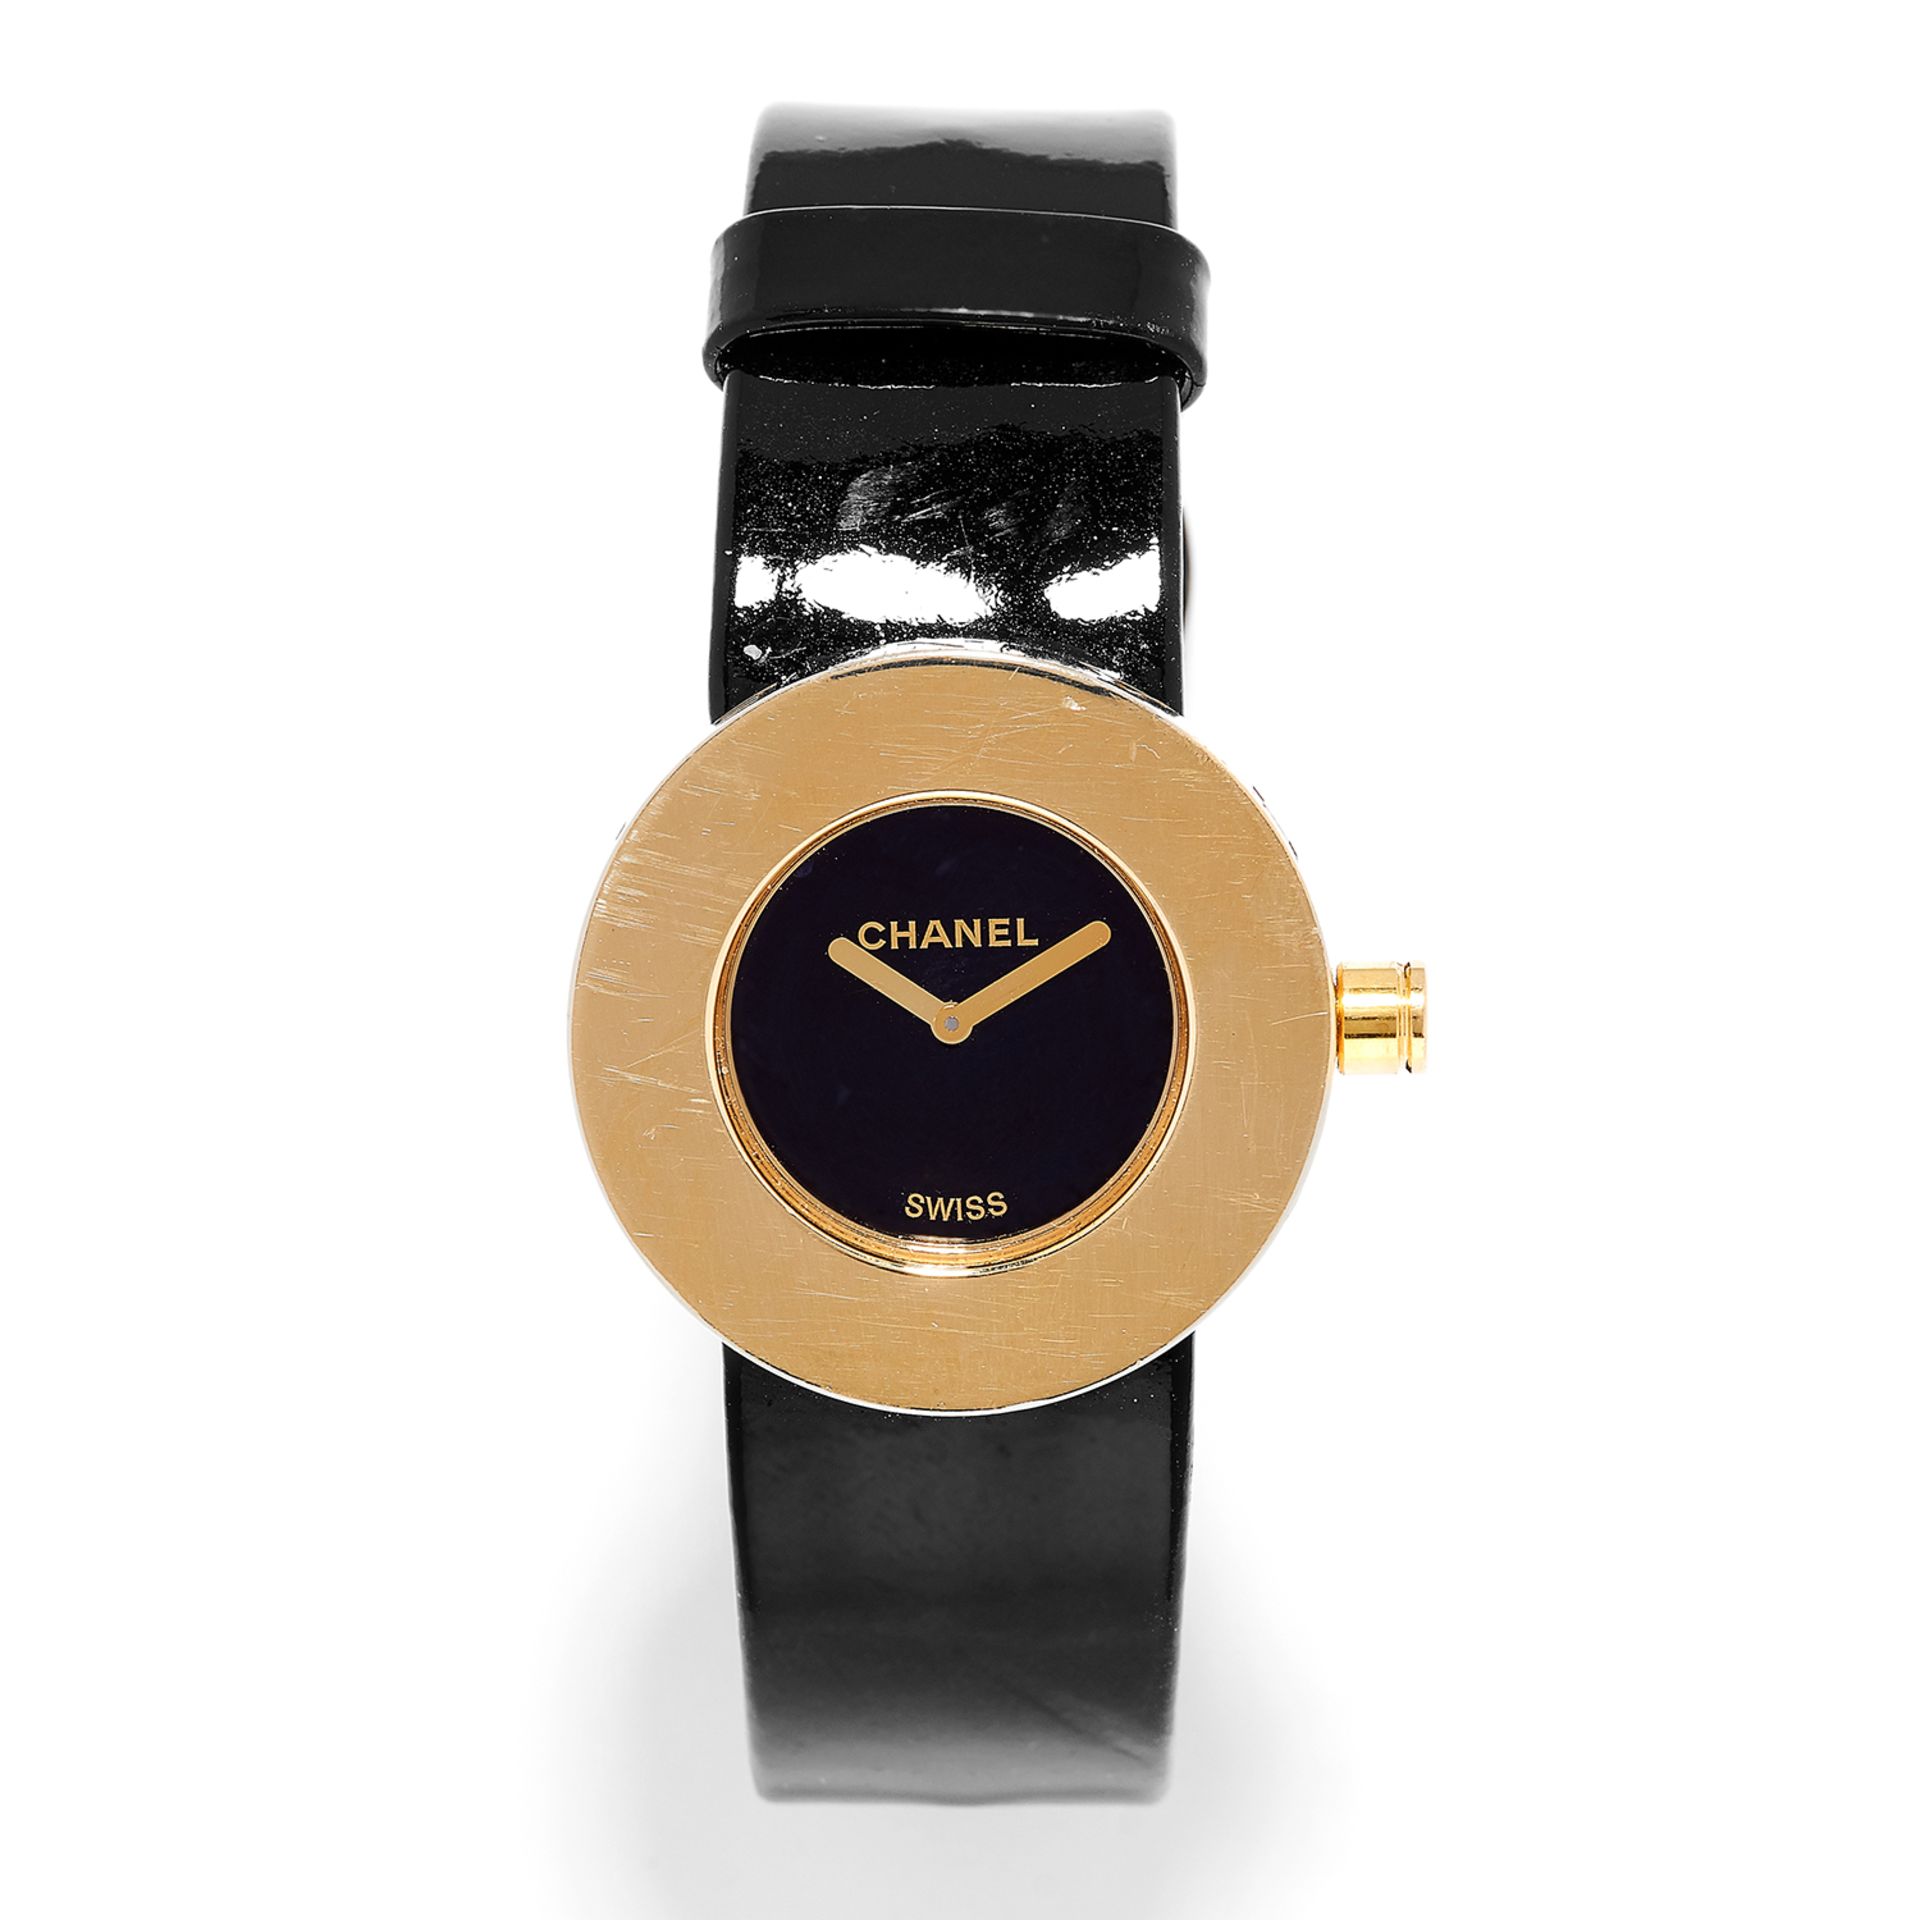 LADIES WRISTWATCH, CHANEL with black dial in gold border engraved with 'Chanel', on black strap,